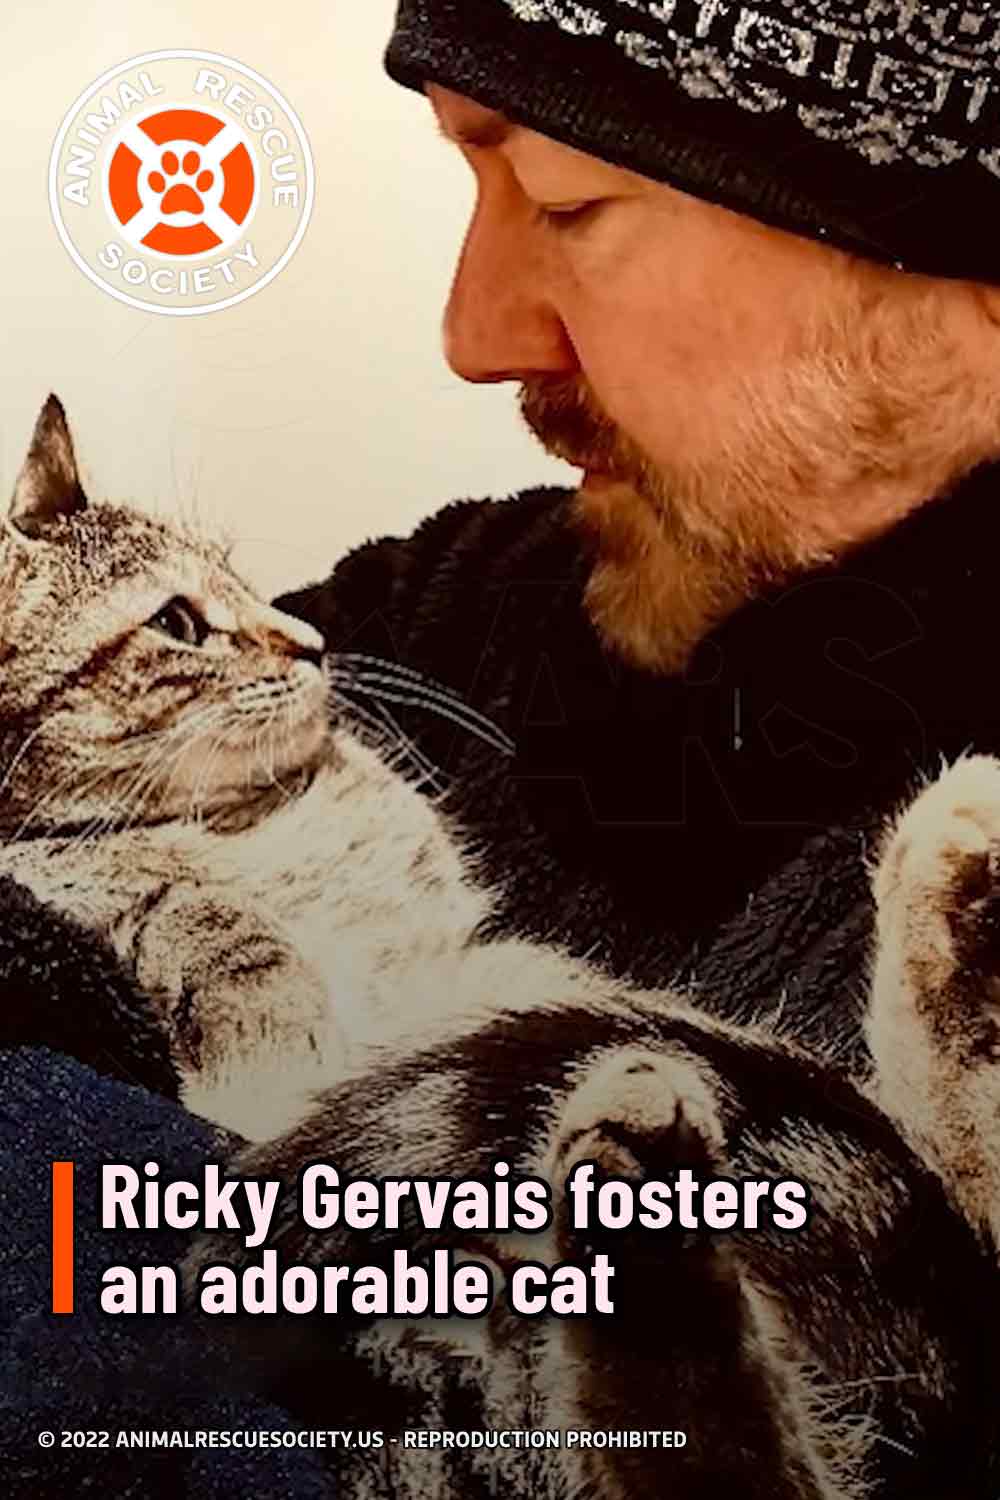 Ricky Gervais fosters an adorable cat